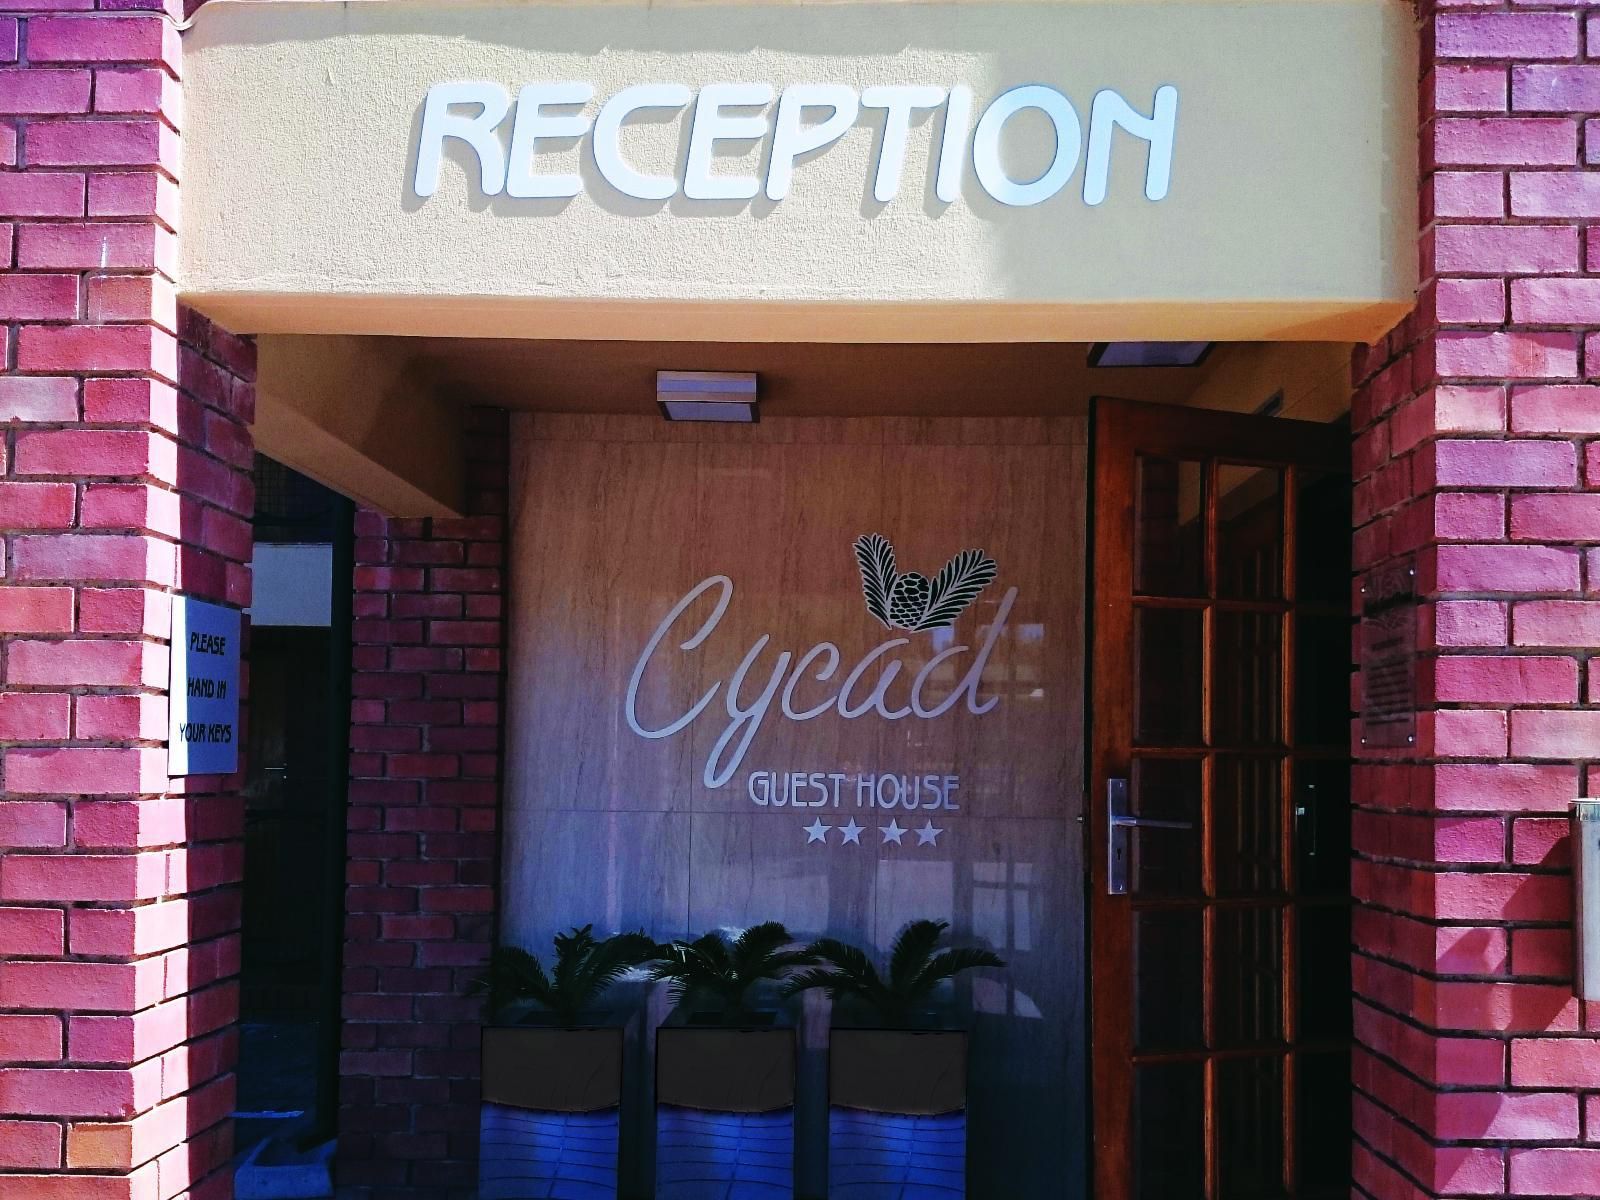 Cycad Guest House Polokwane Pietersburg Limpopo Province South Africa Bar